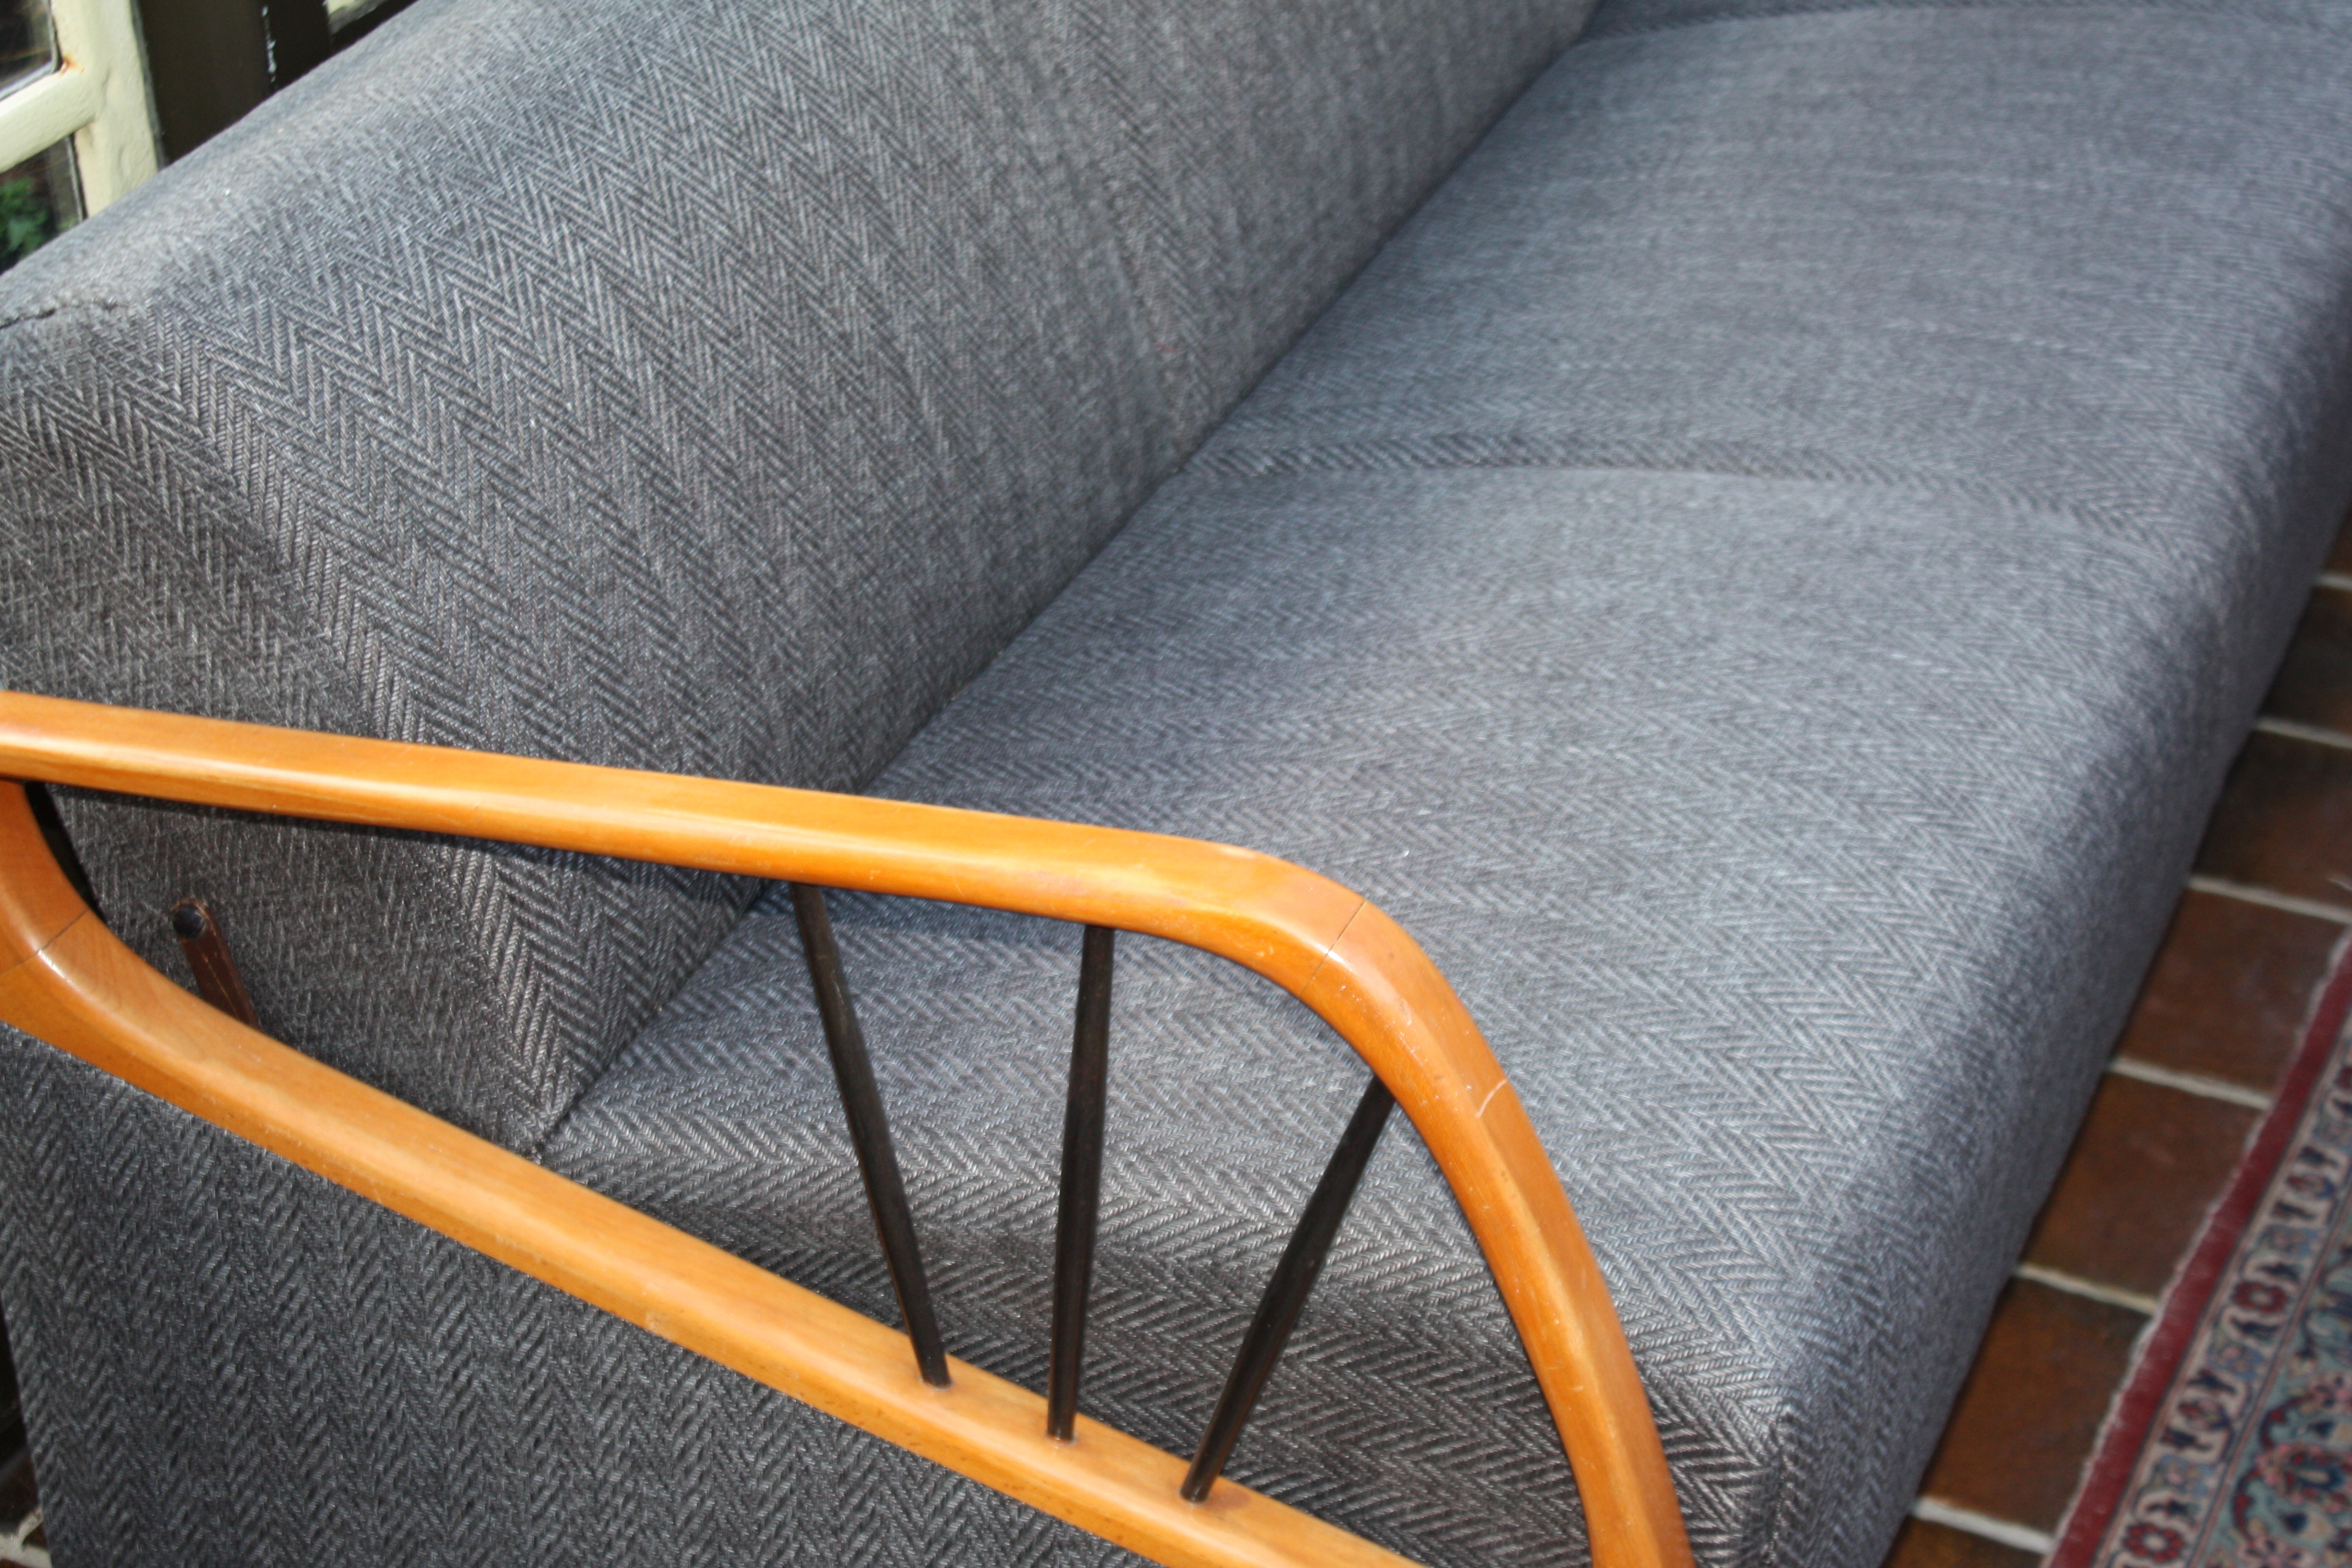 A 1960's  Sofa with extractable seat